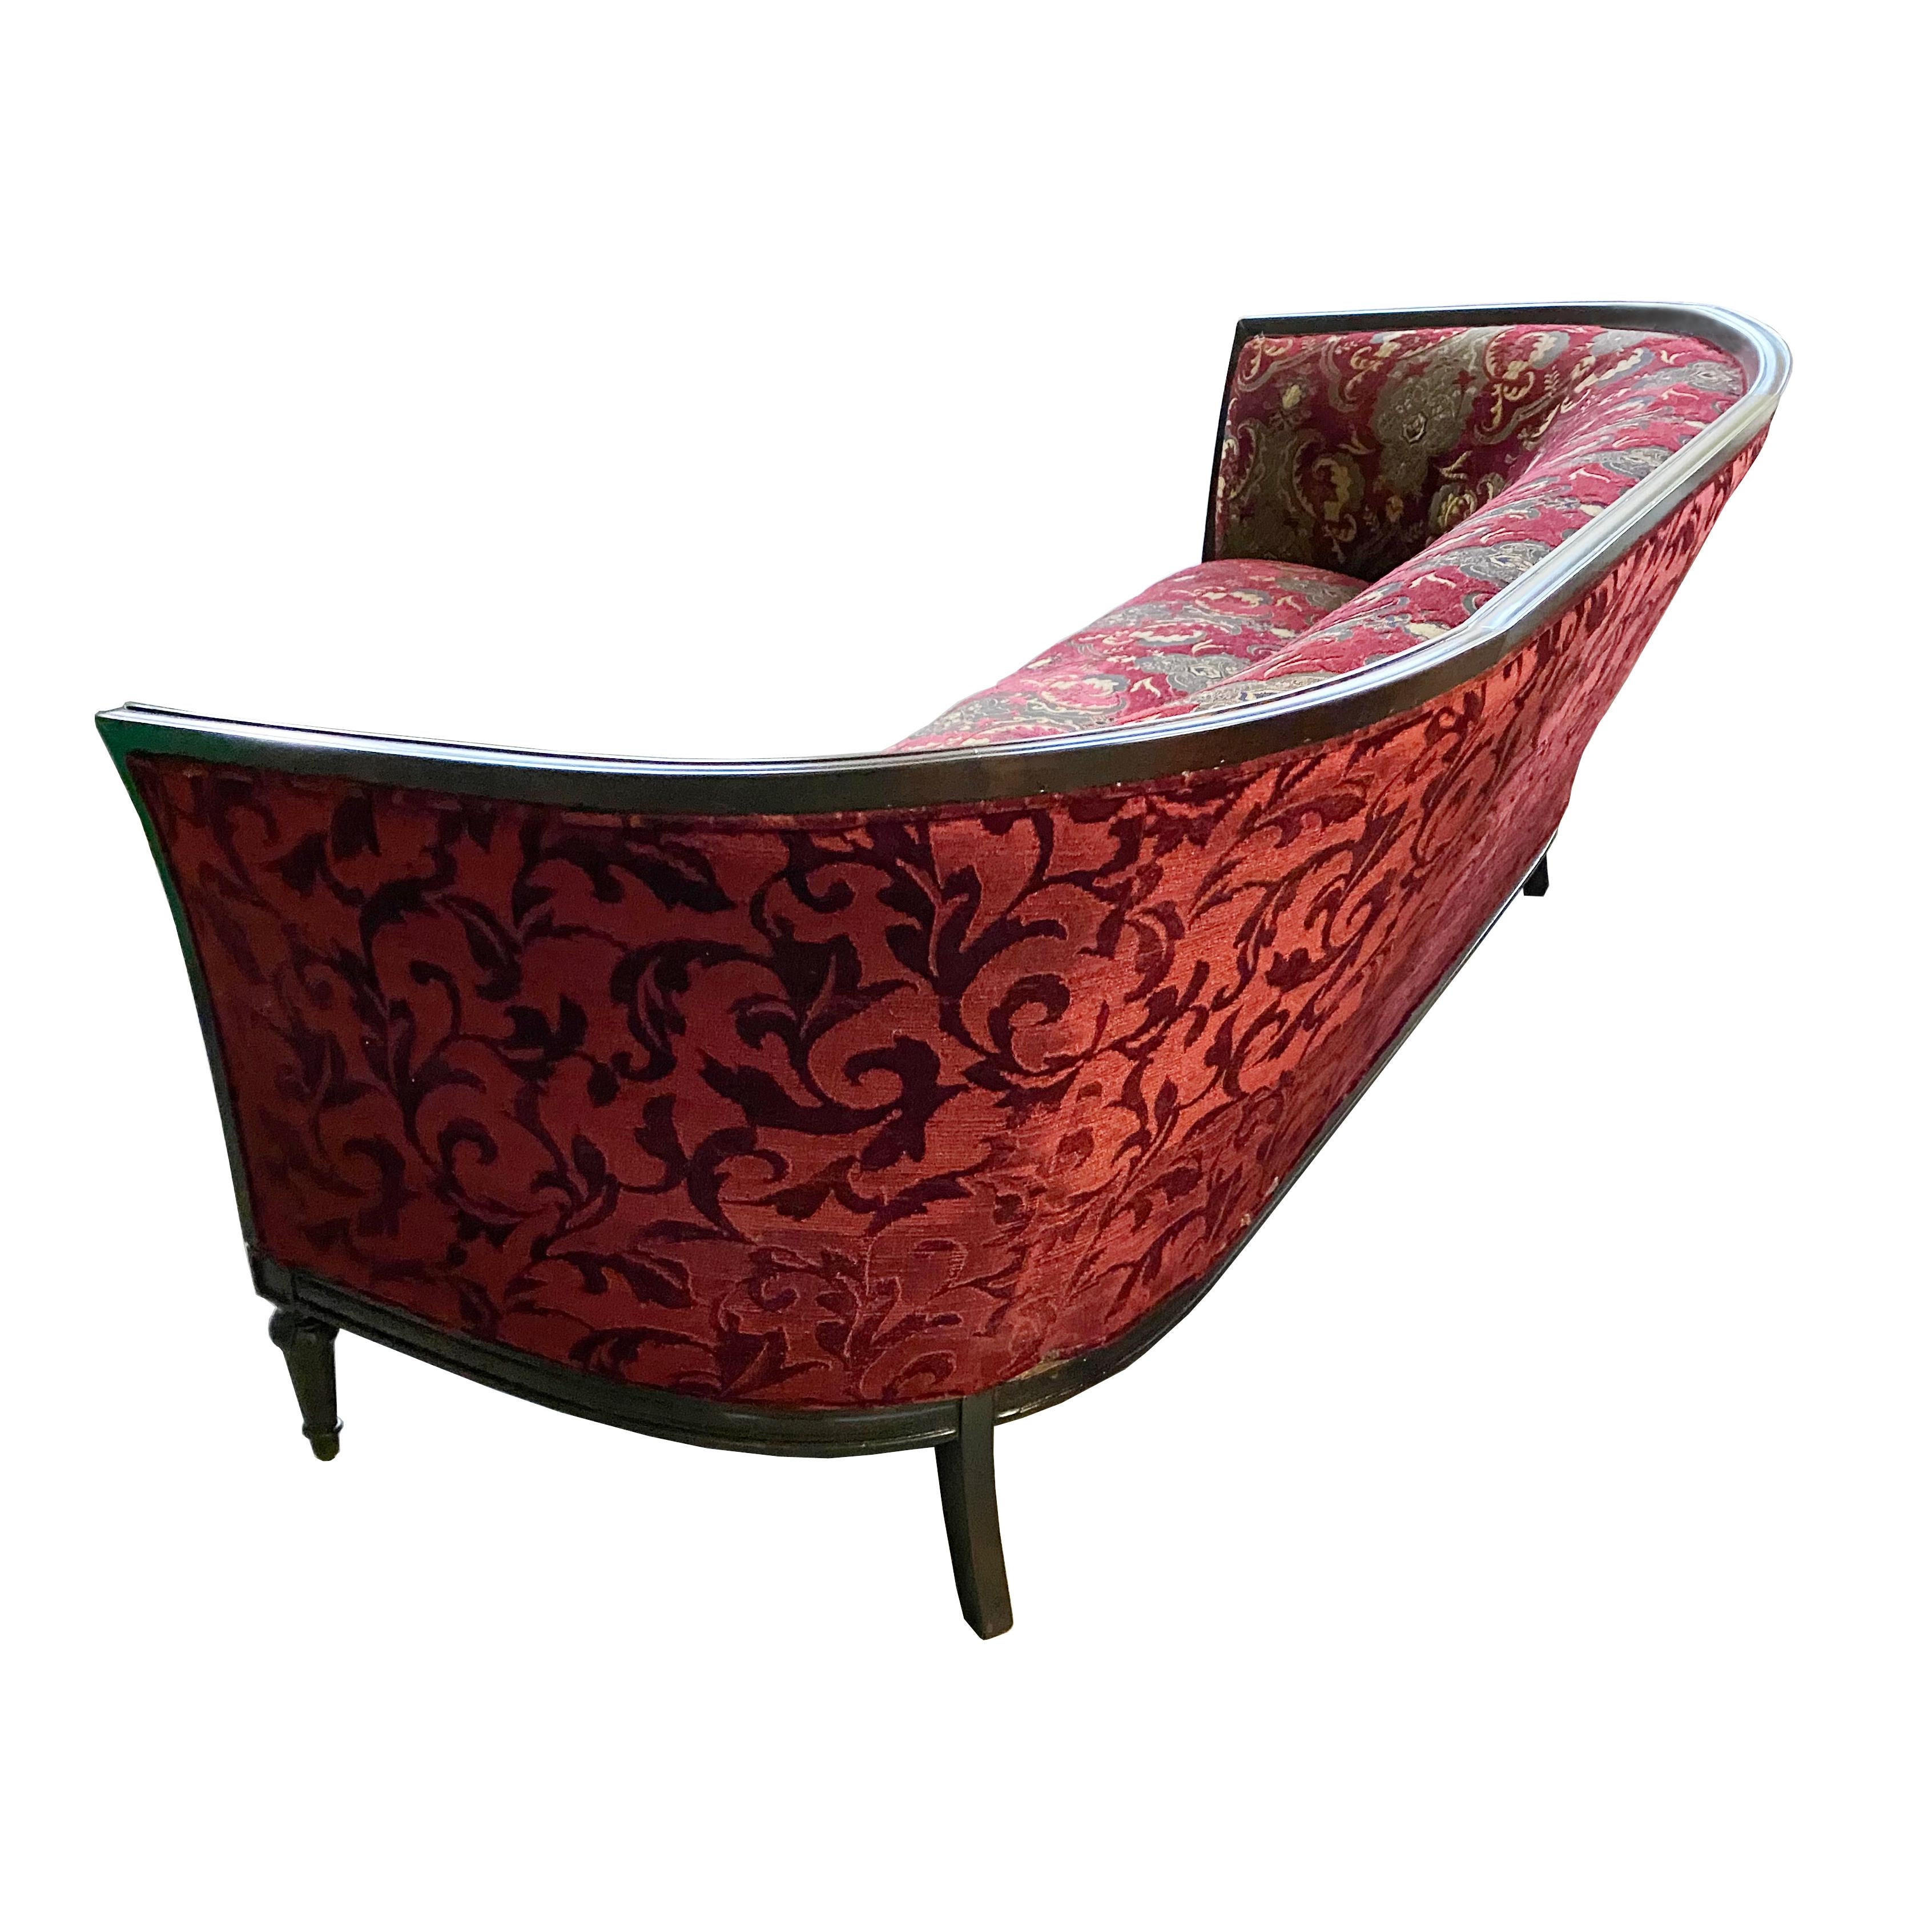 Art Deco French curved sofa

Mid 20th century, with rich jewel-toned damask coordinating with embossed upholstery on the back.
Ebonized mahogany frame. 


  